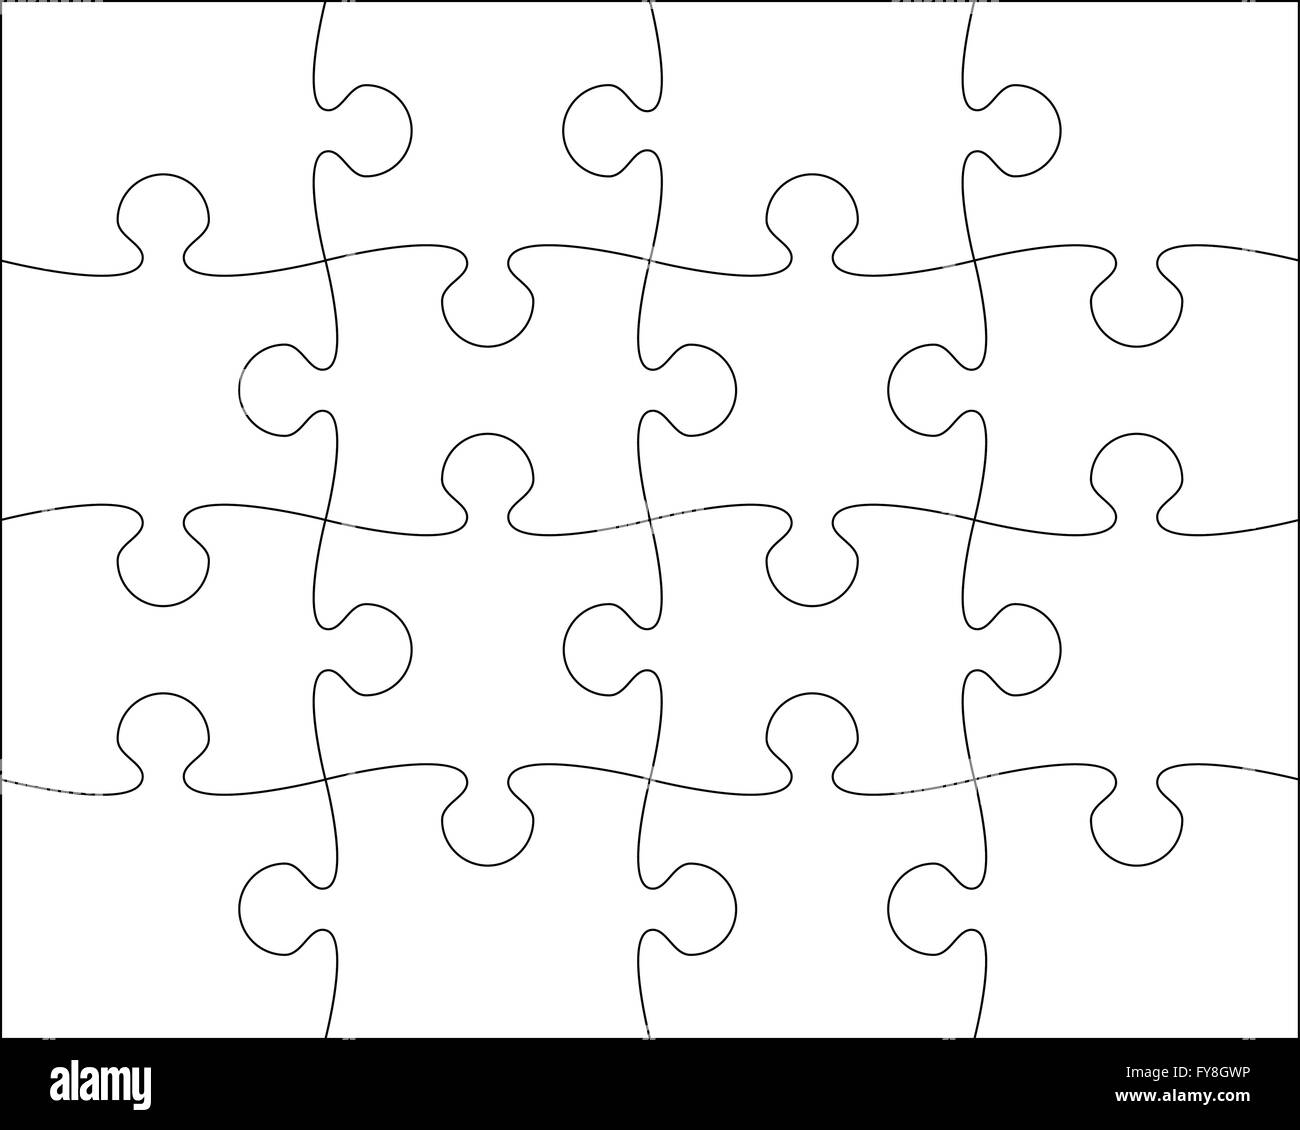 puzzle blank template easy to edit vector illustration Stock Vector ...